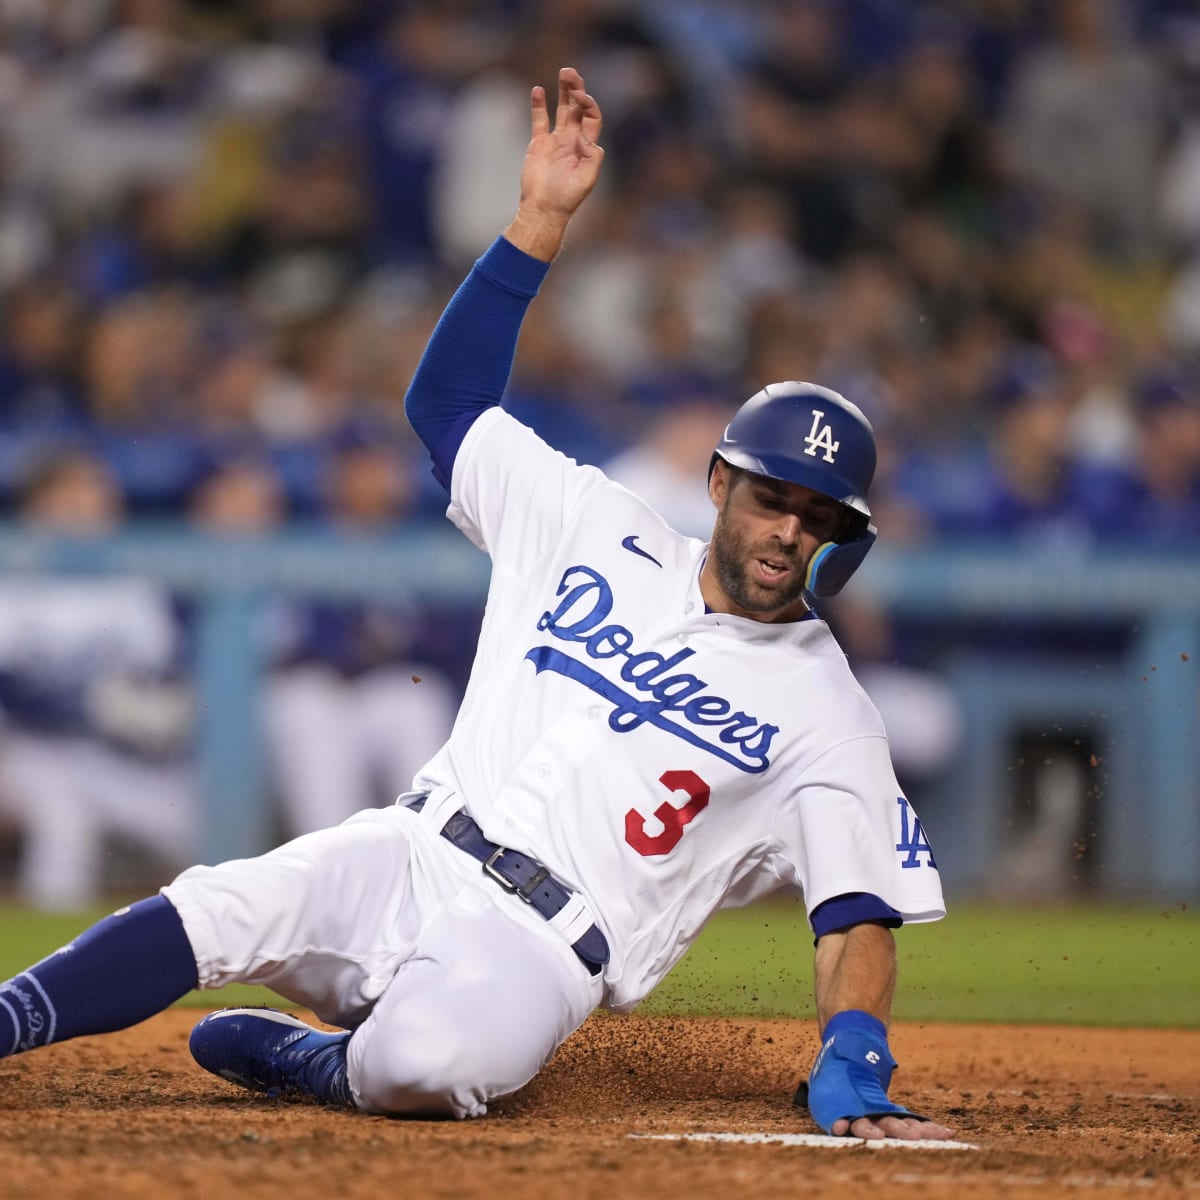 LA Dodgers star Chris Taylor shares how he found out about his